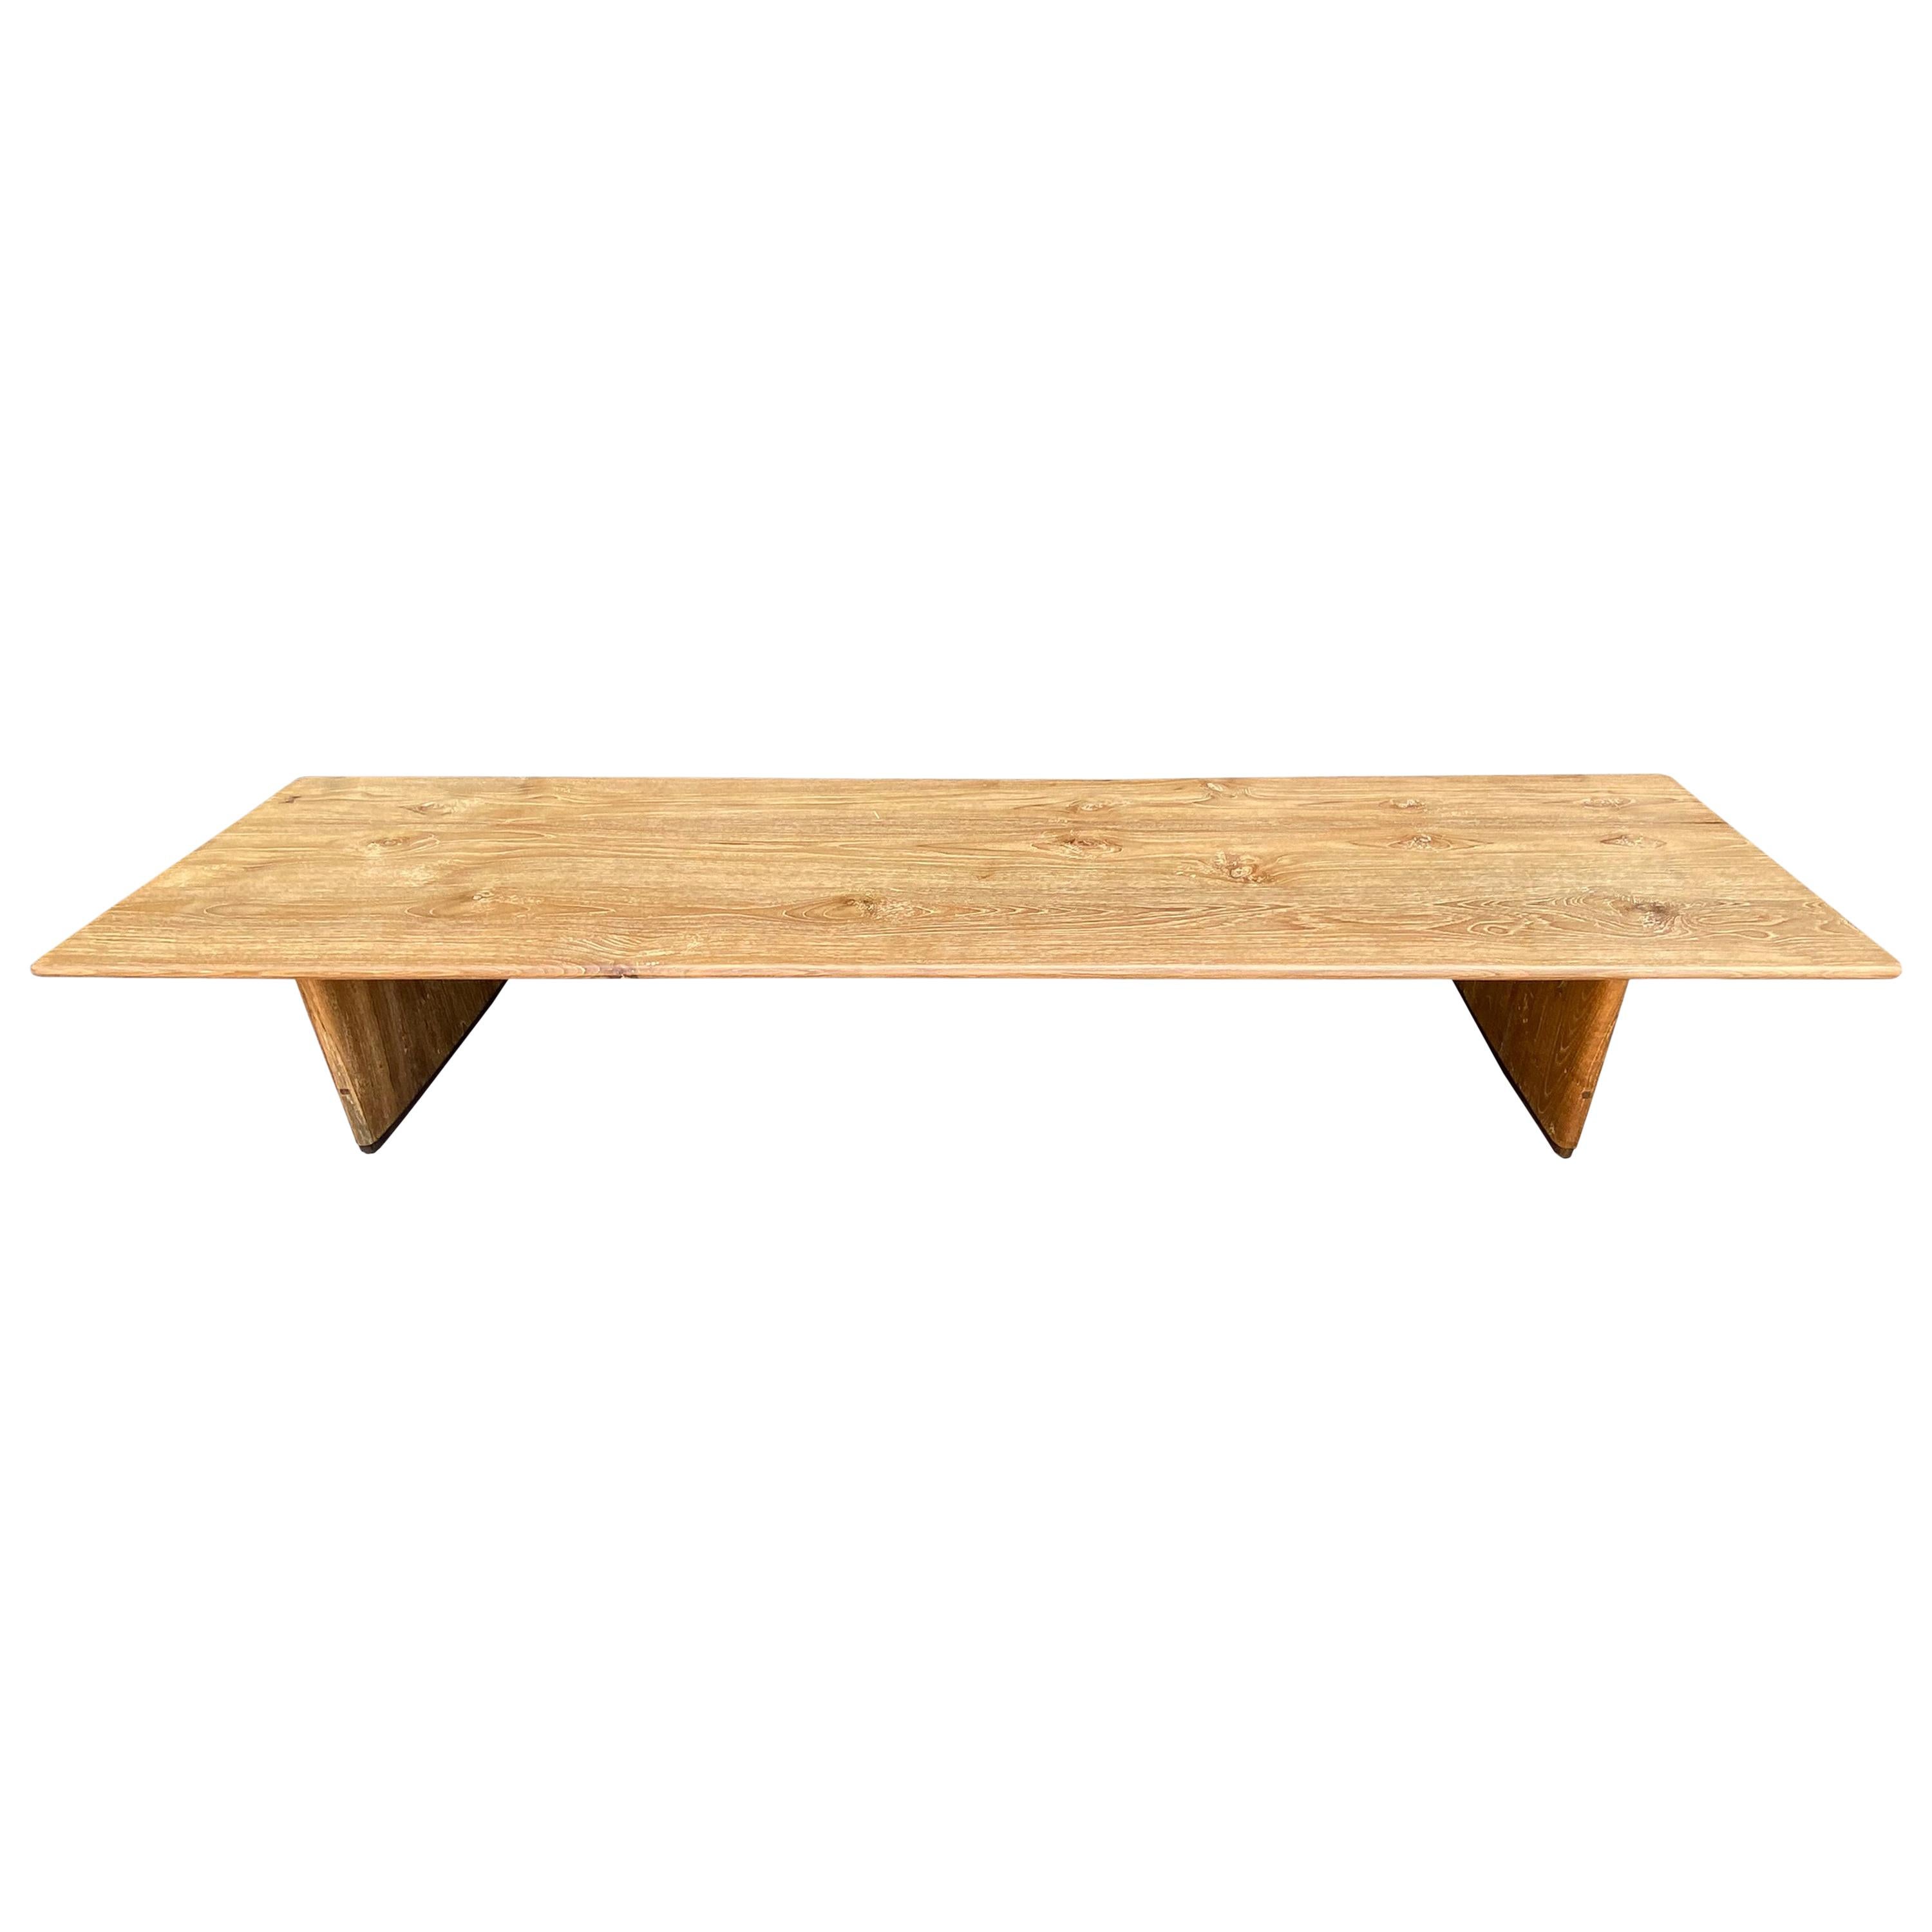 Andrianna Shamaris Midcentury Style Couture Teak Wood Coffee Table For Sale